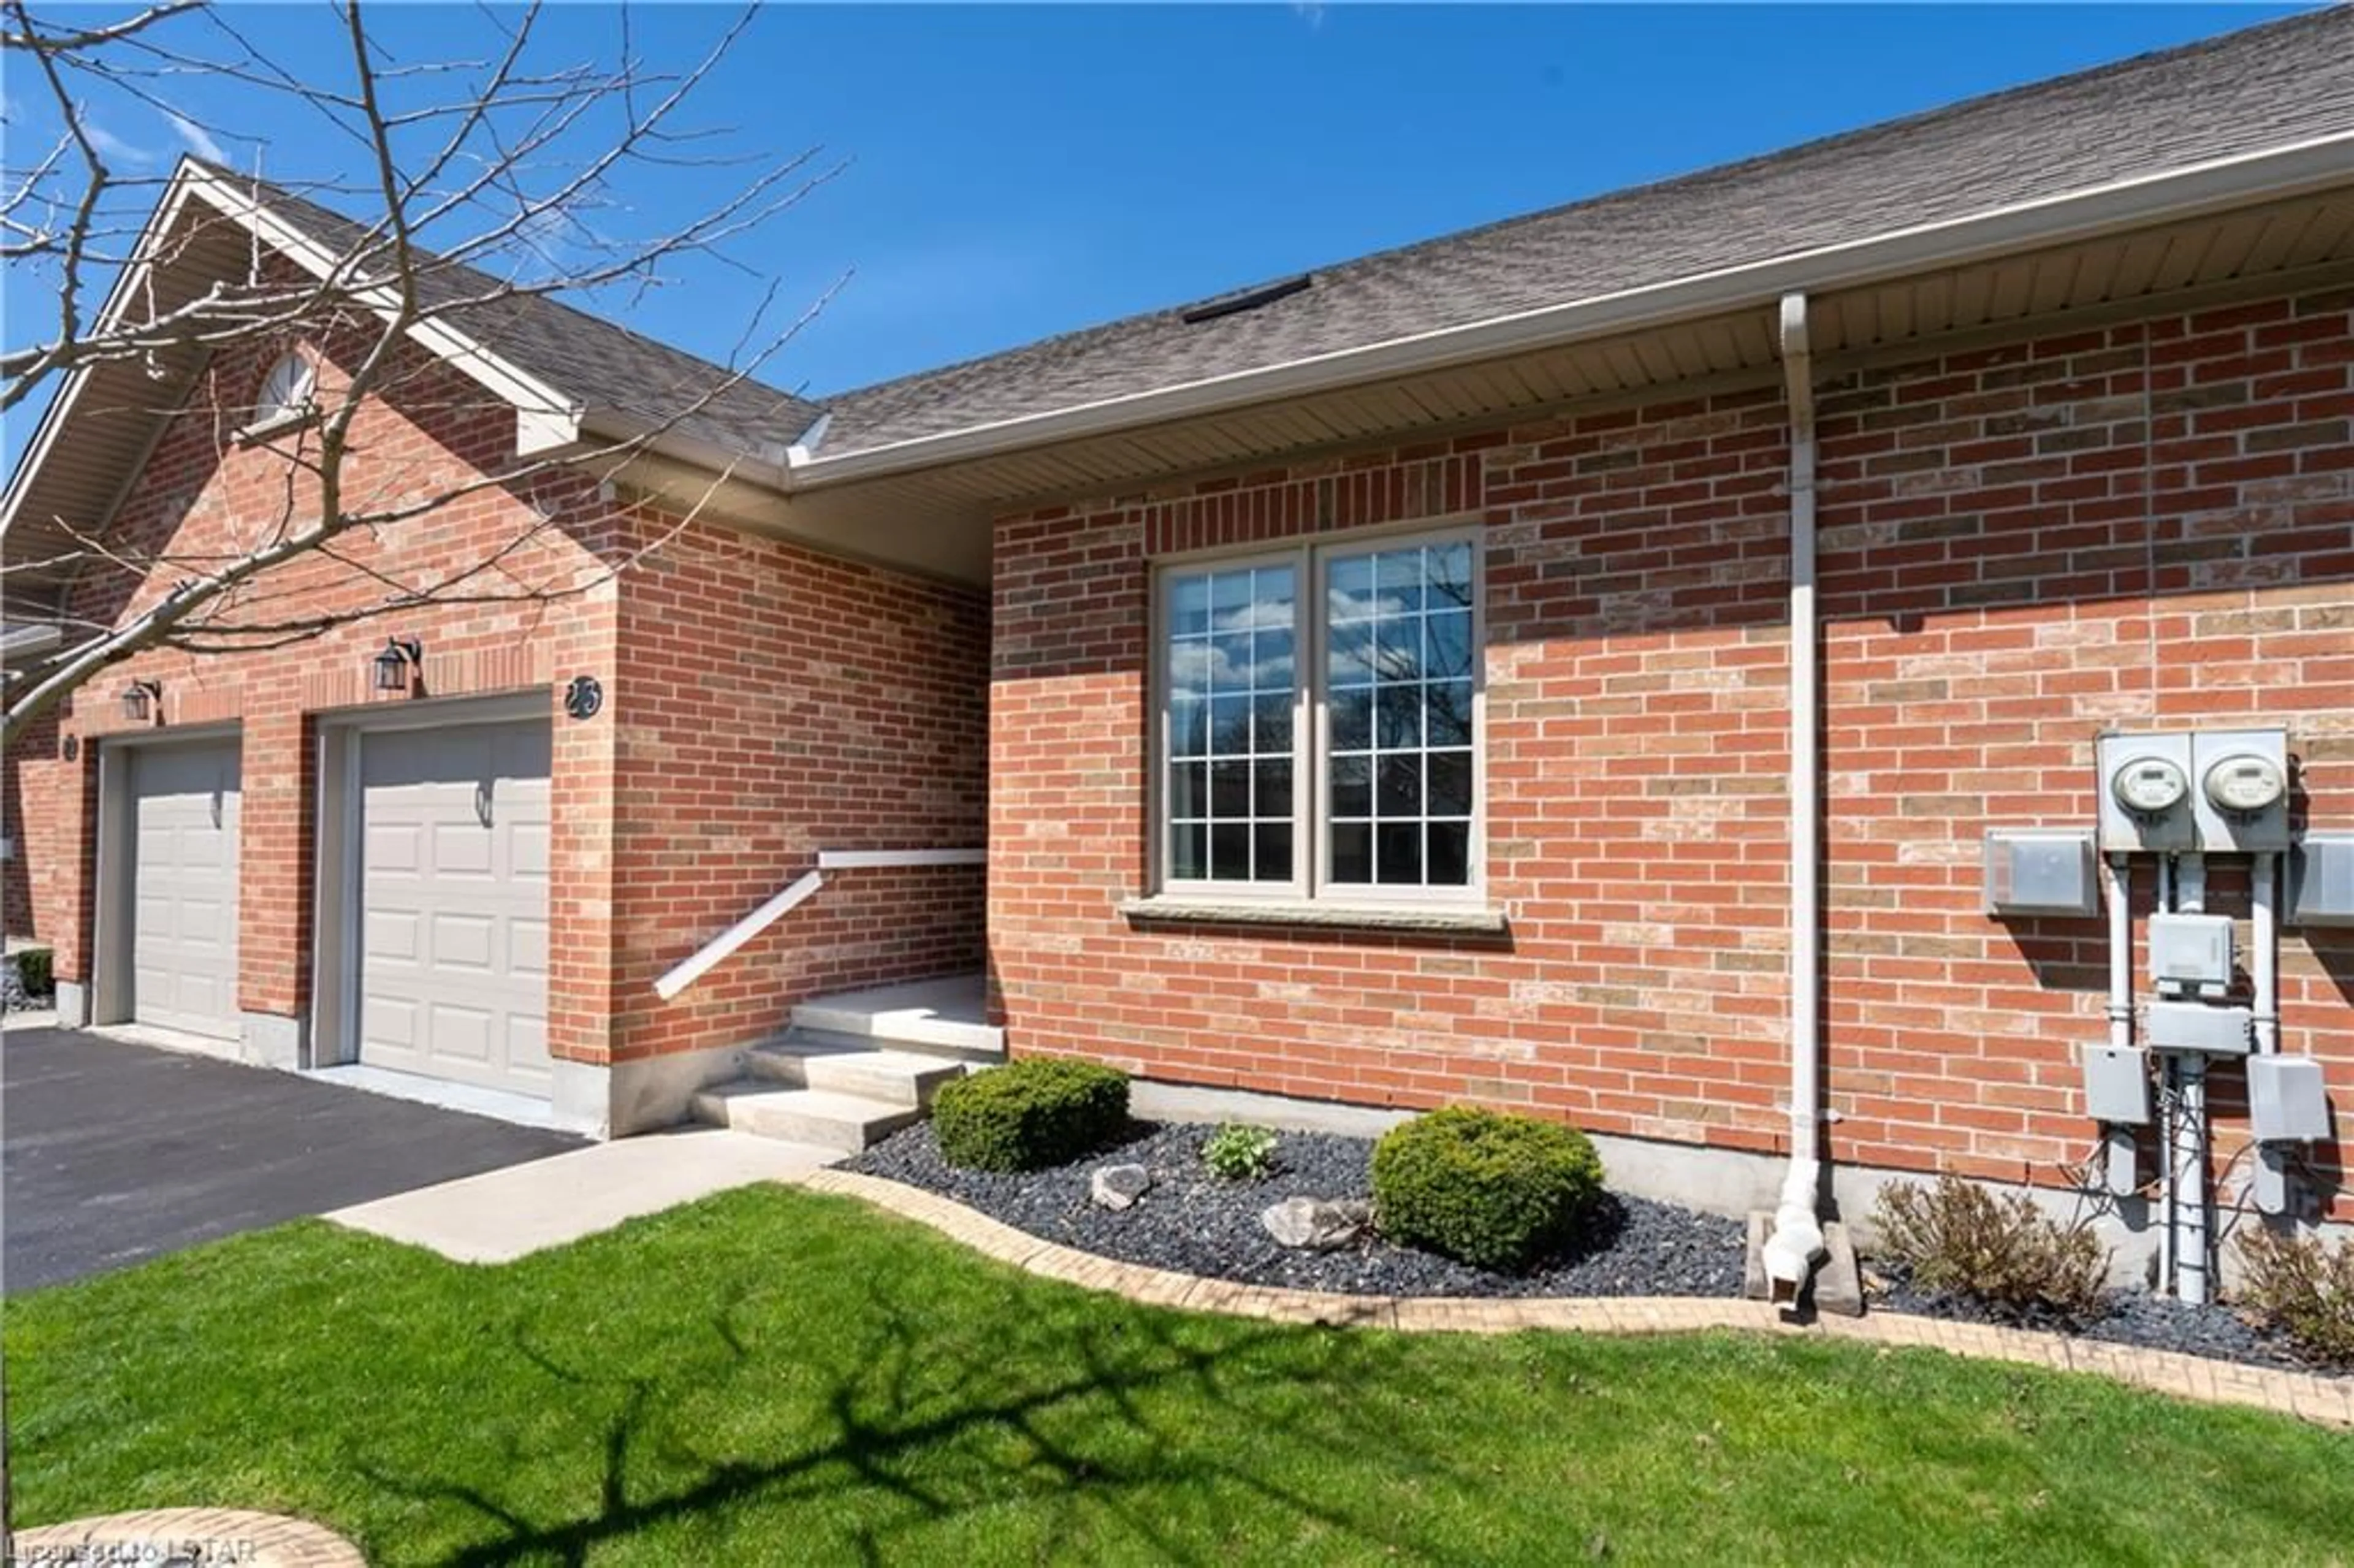 Home with brick exterior material for 307 Metcalfe St #23, Strathroy Ontario N7G 1R1